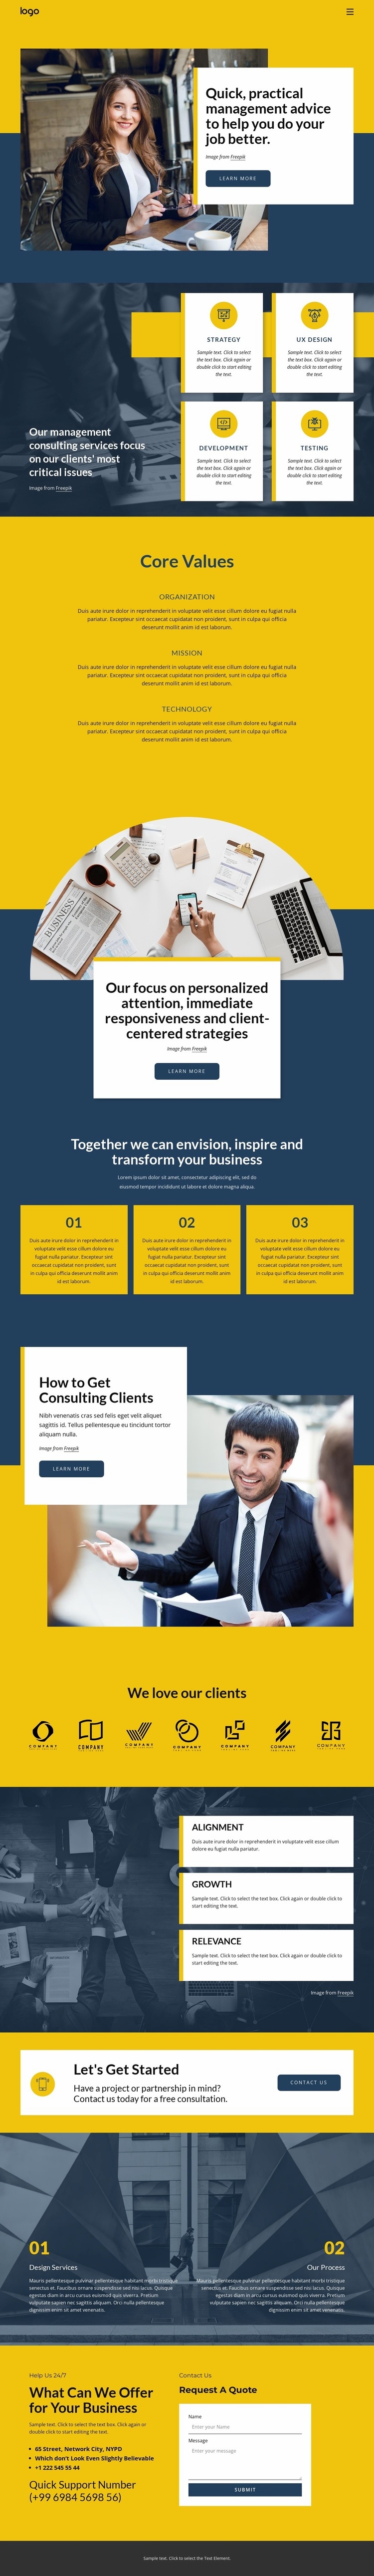 Business consulting firm Web Page Design